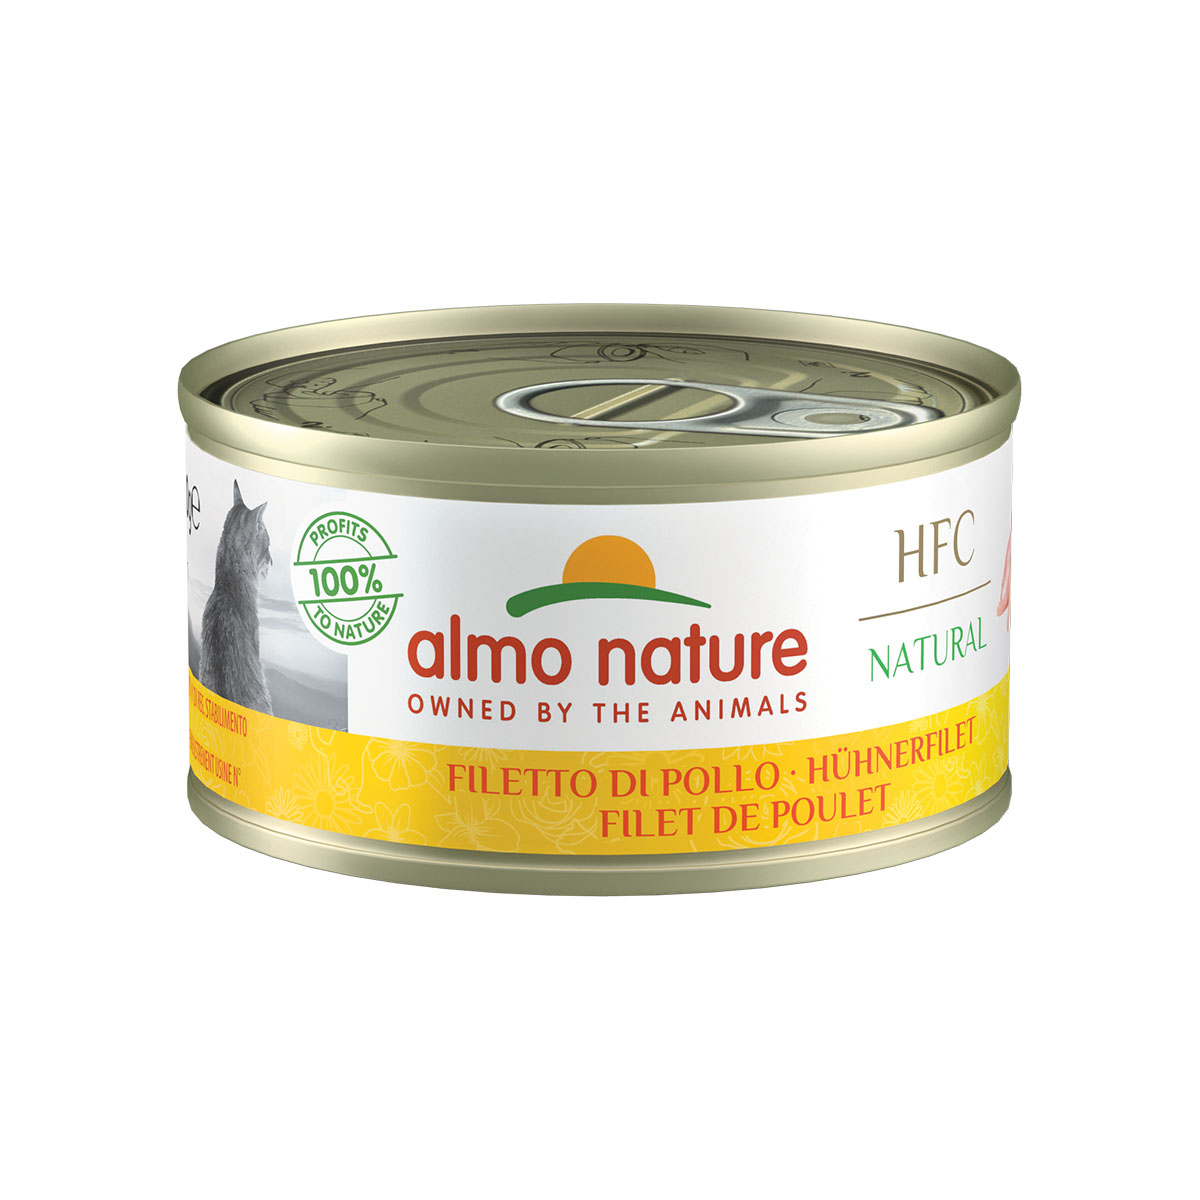 Almo Nature HFC Natural Megapack Hühnerfilet 6x70g